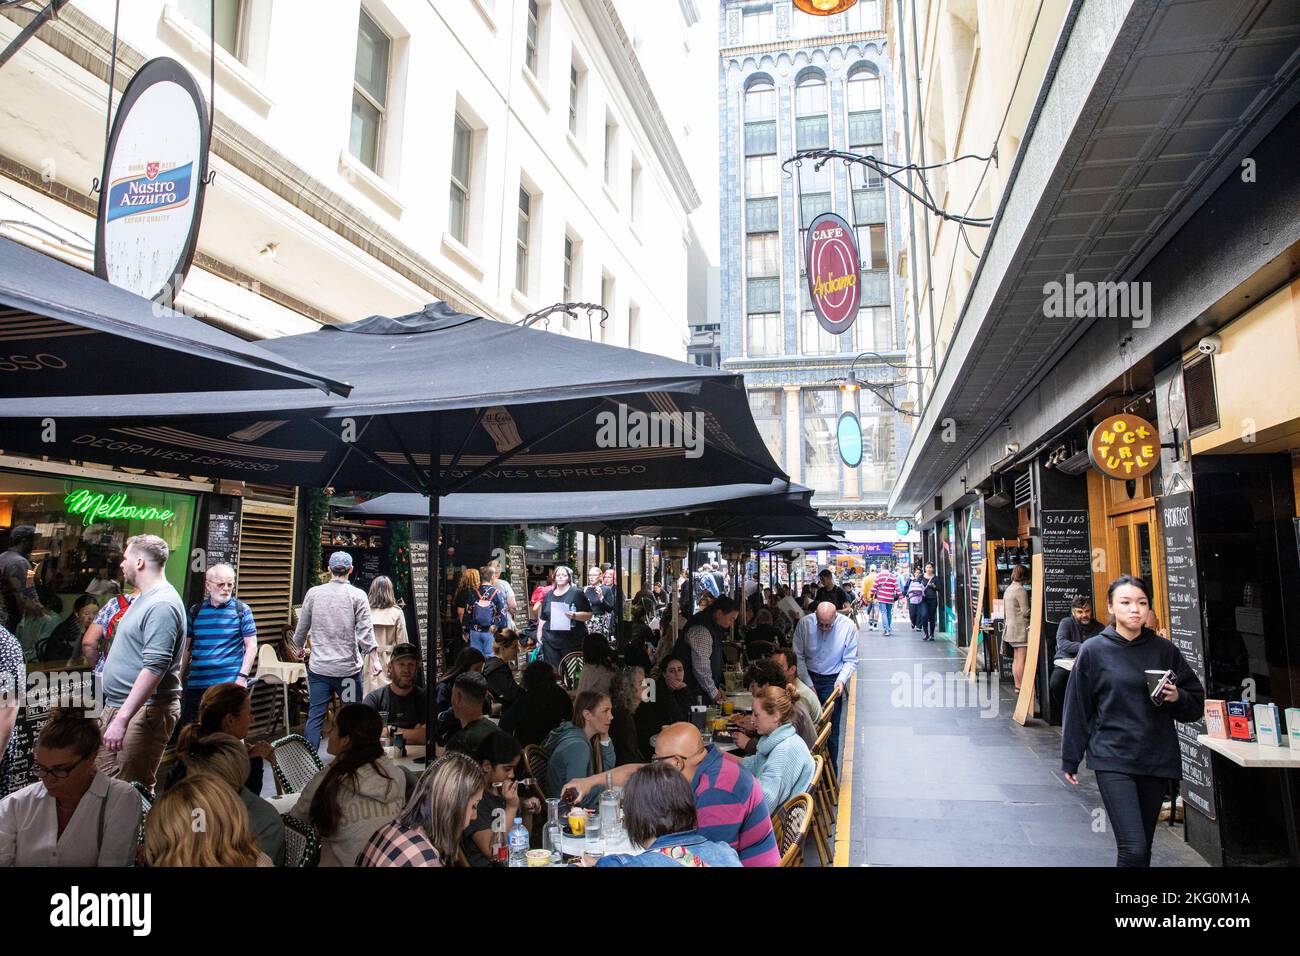 Melbourne laneway, Victoria, people eating and dining at cafes and restaurants in Degraves street, Melbourne city centre,Australia Stock Photo